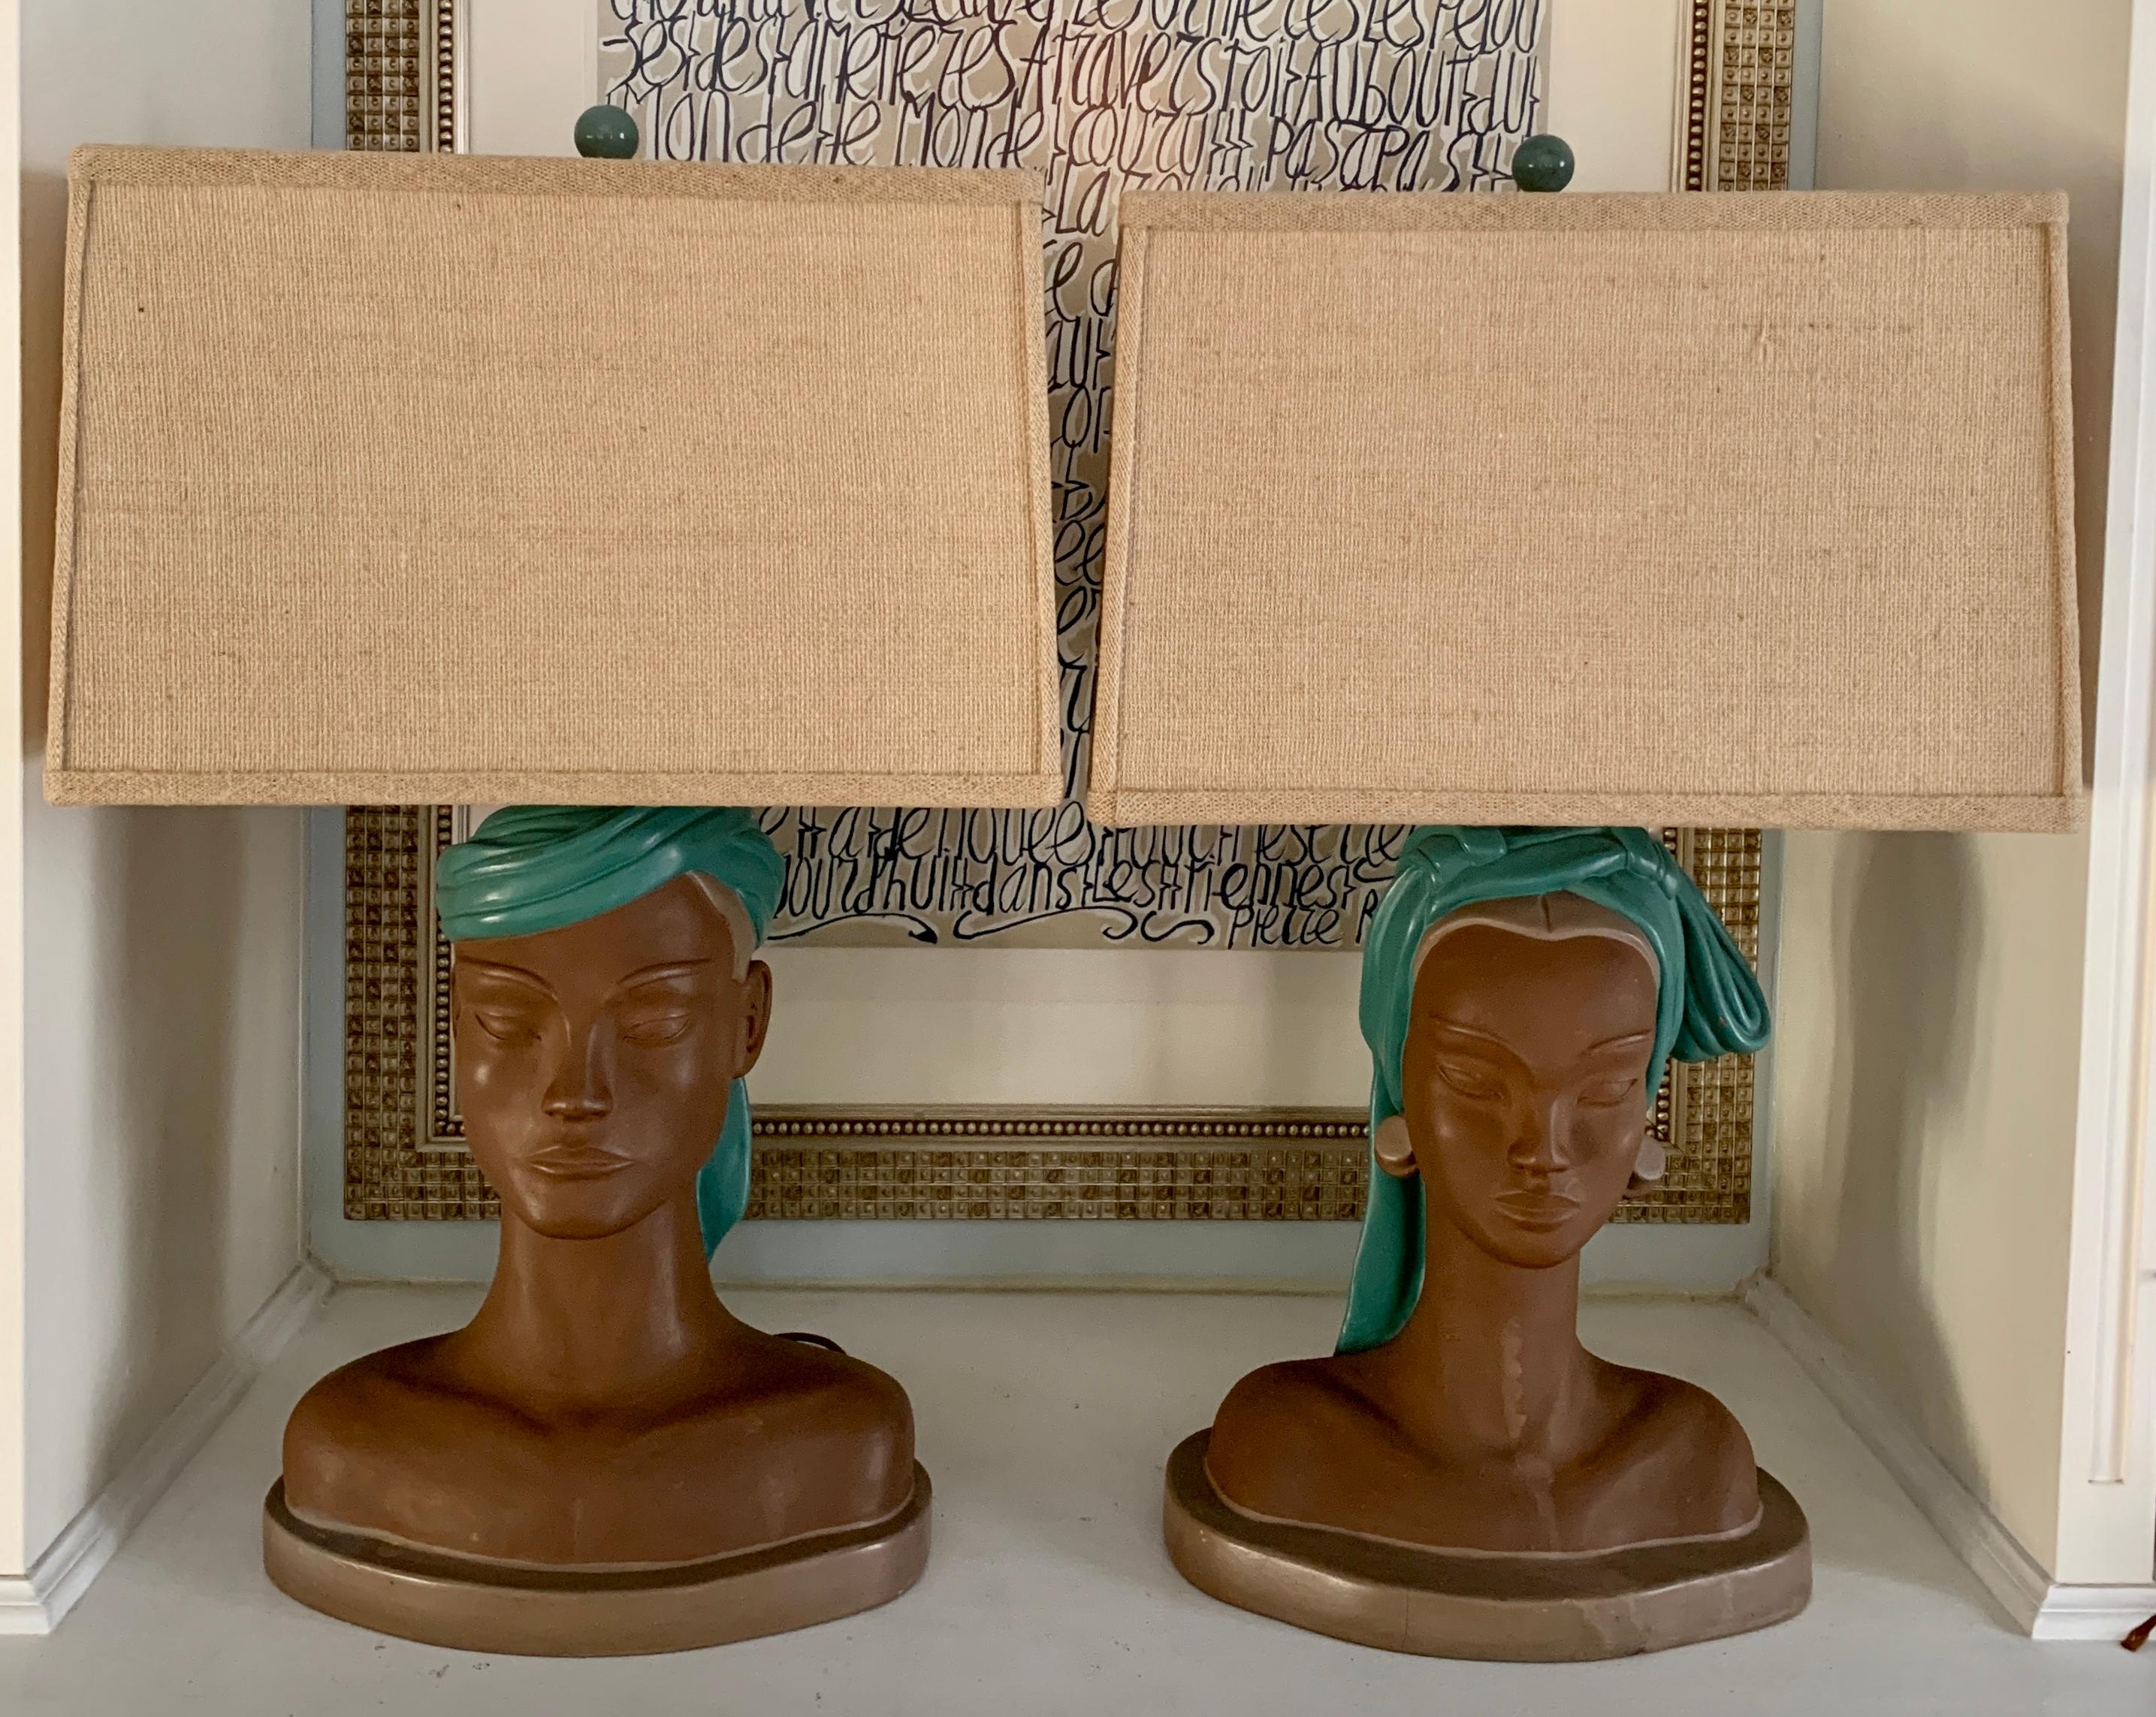 A pair of male and female ethnic figural bust lamps. 

While these resemble Hawaiian in style, they would work well in many corresponding environments. The lamps are plaster and in good condition overall. The custom woven shades are included with